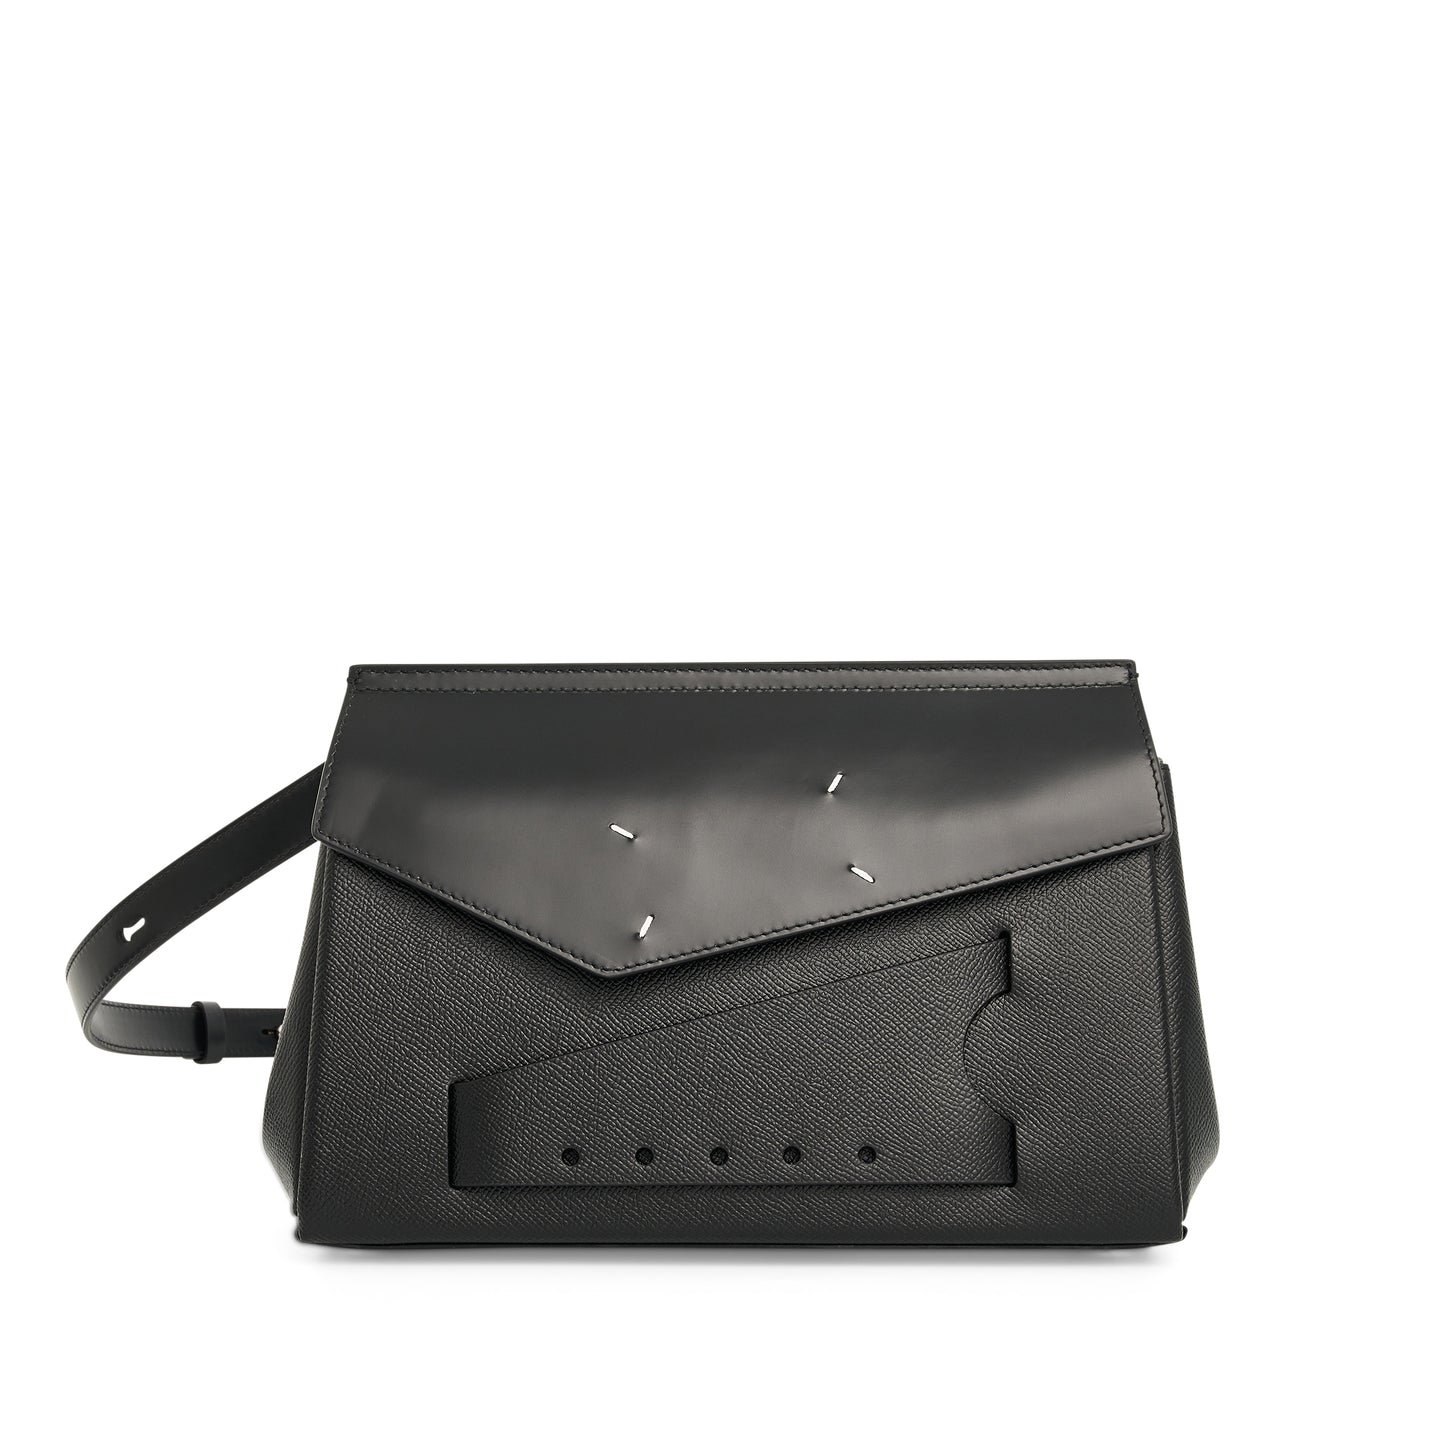 Snatched Leather Tote Bag in Black